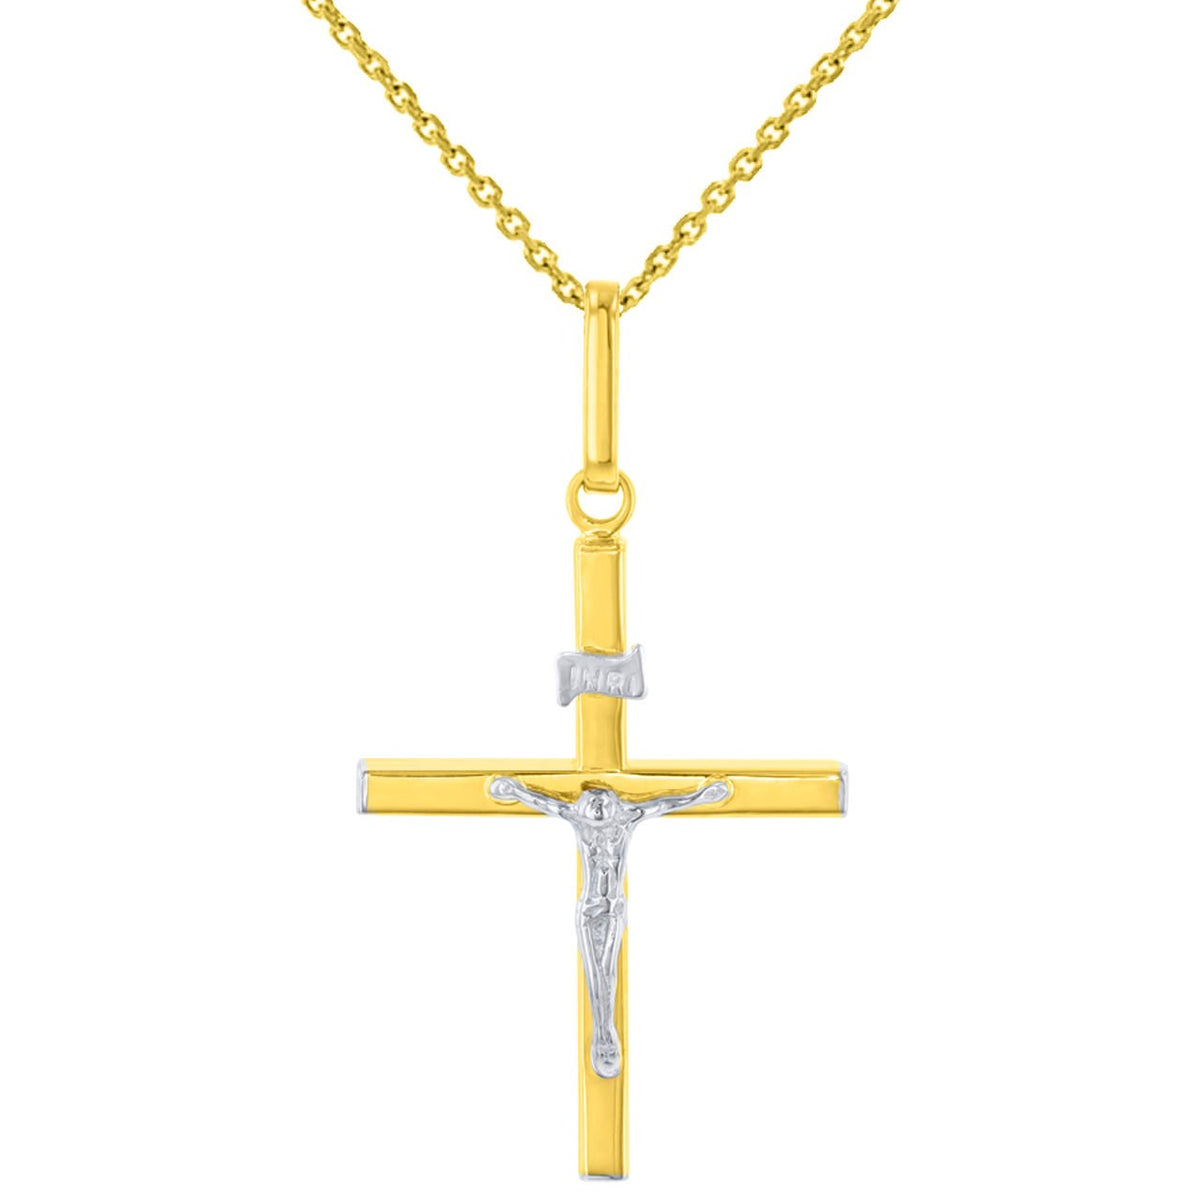 Solid 14K Two-Tone Gold Slender Cross INRI Jesus Crucifix Charm Pendant with Cable, Curb, or Figaro Chain Necklace